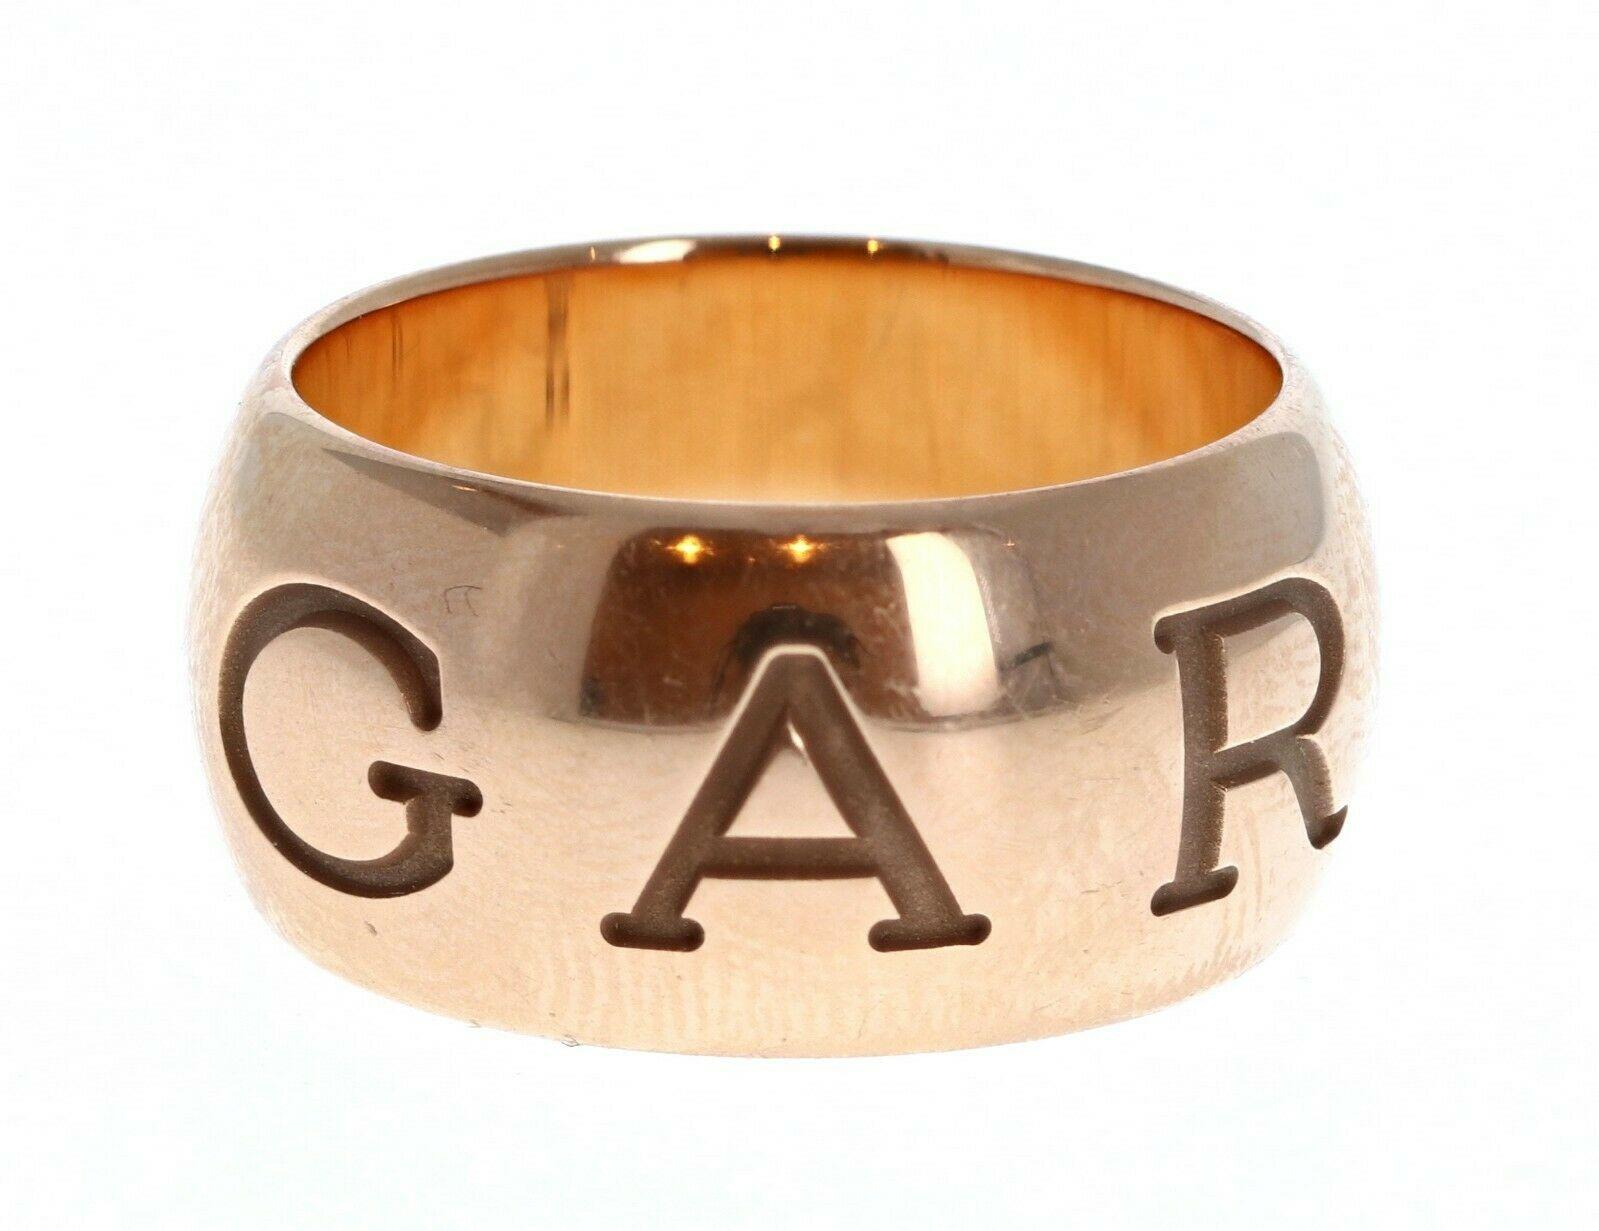 Bvlgari Bulgari 18K Rose Gold Monologo Wide Band Ring 12.9g Size 54


For sale is a Bvlgari wide band ring 
The ring is a size 54 US size 6.5
 Perfect worn day or night.
 Get this stunning ring now!



Metal: 18k rose gold
     
Hallmark: 750 Made